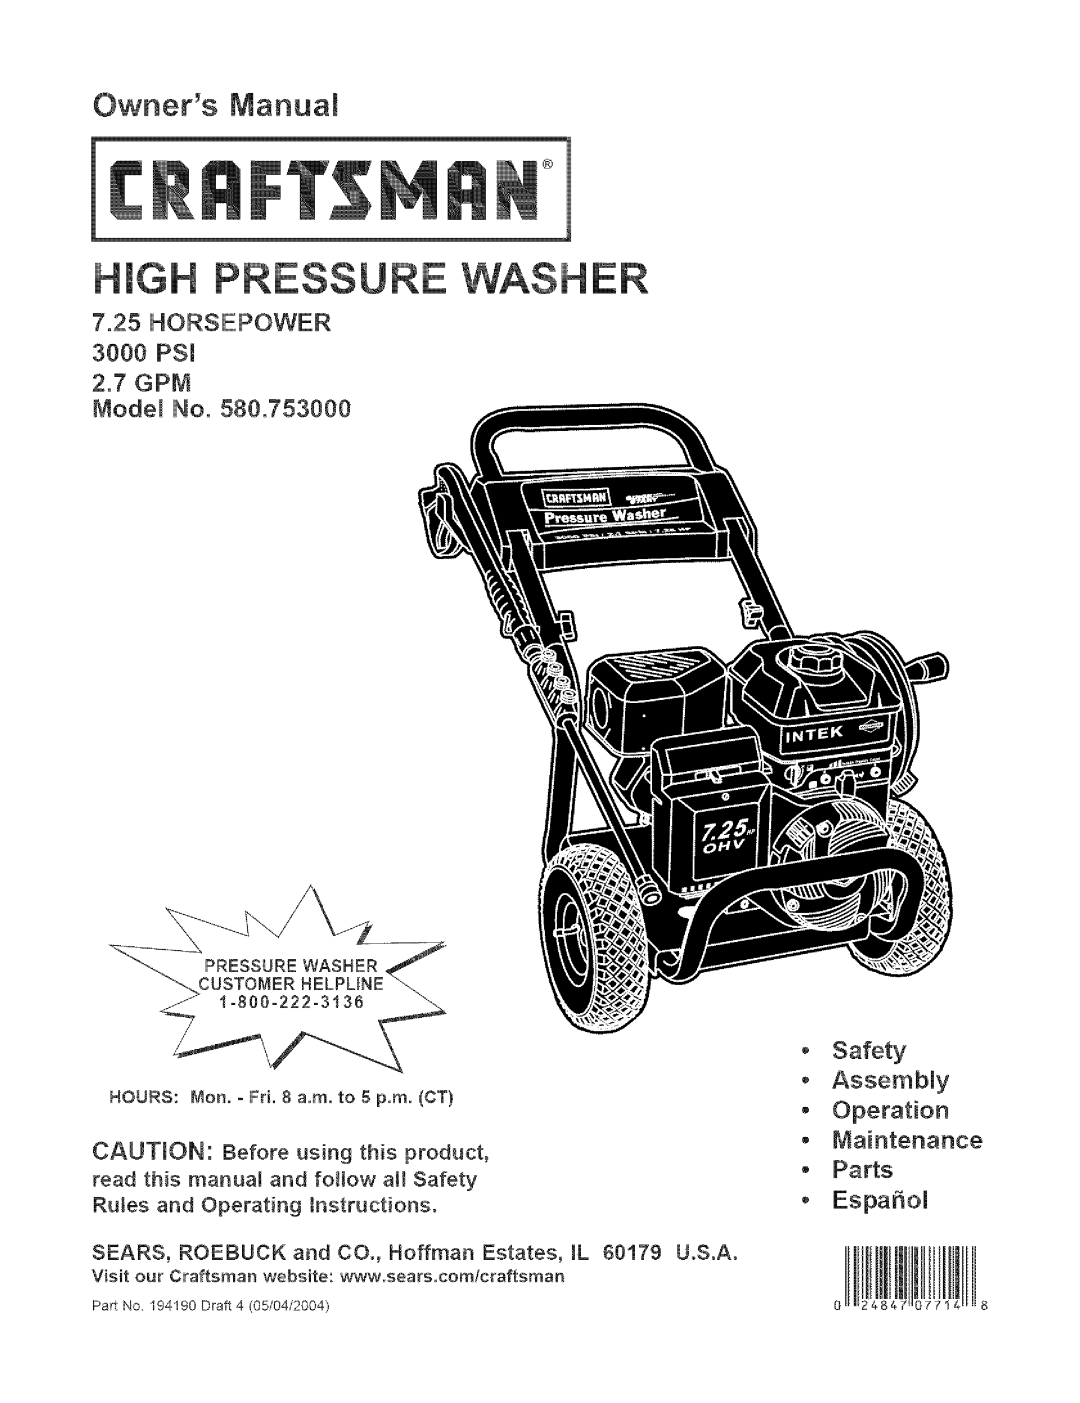 Craftsman 580.753 manual 7.25HORSEPOWER 3000 PSI 2.7GPM Modem No, Safety Assembmy Operation, oEspaSol, Owners Manuam 